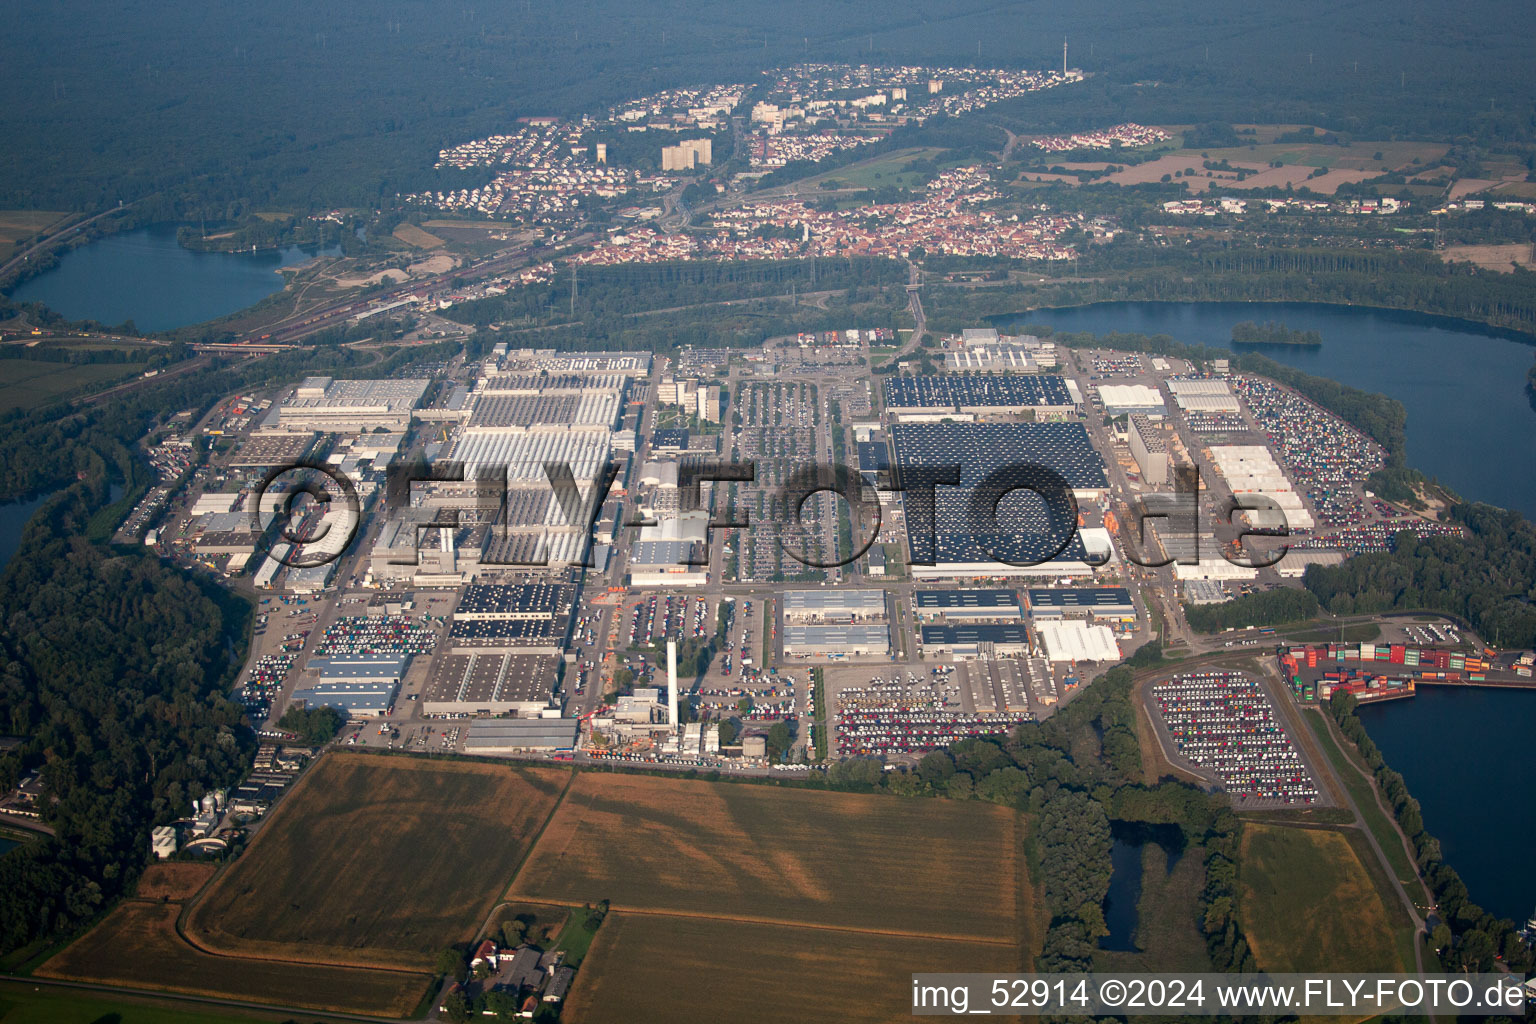 Aerial view of Daimler from the East in the district Maximiliansau in Wörth am Rhein in the state Rhineland-Palatinate, Germany